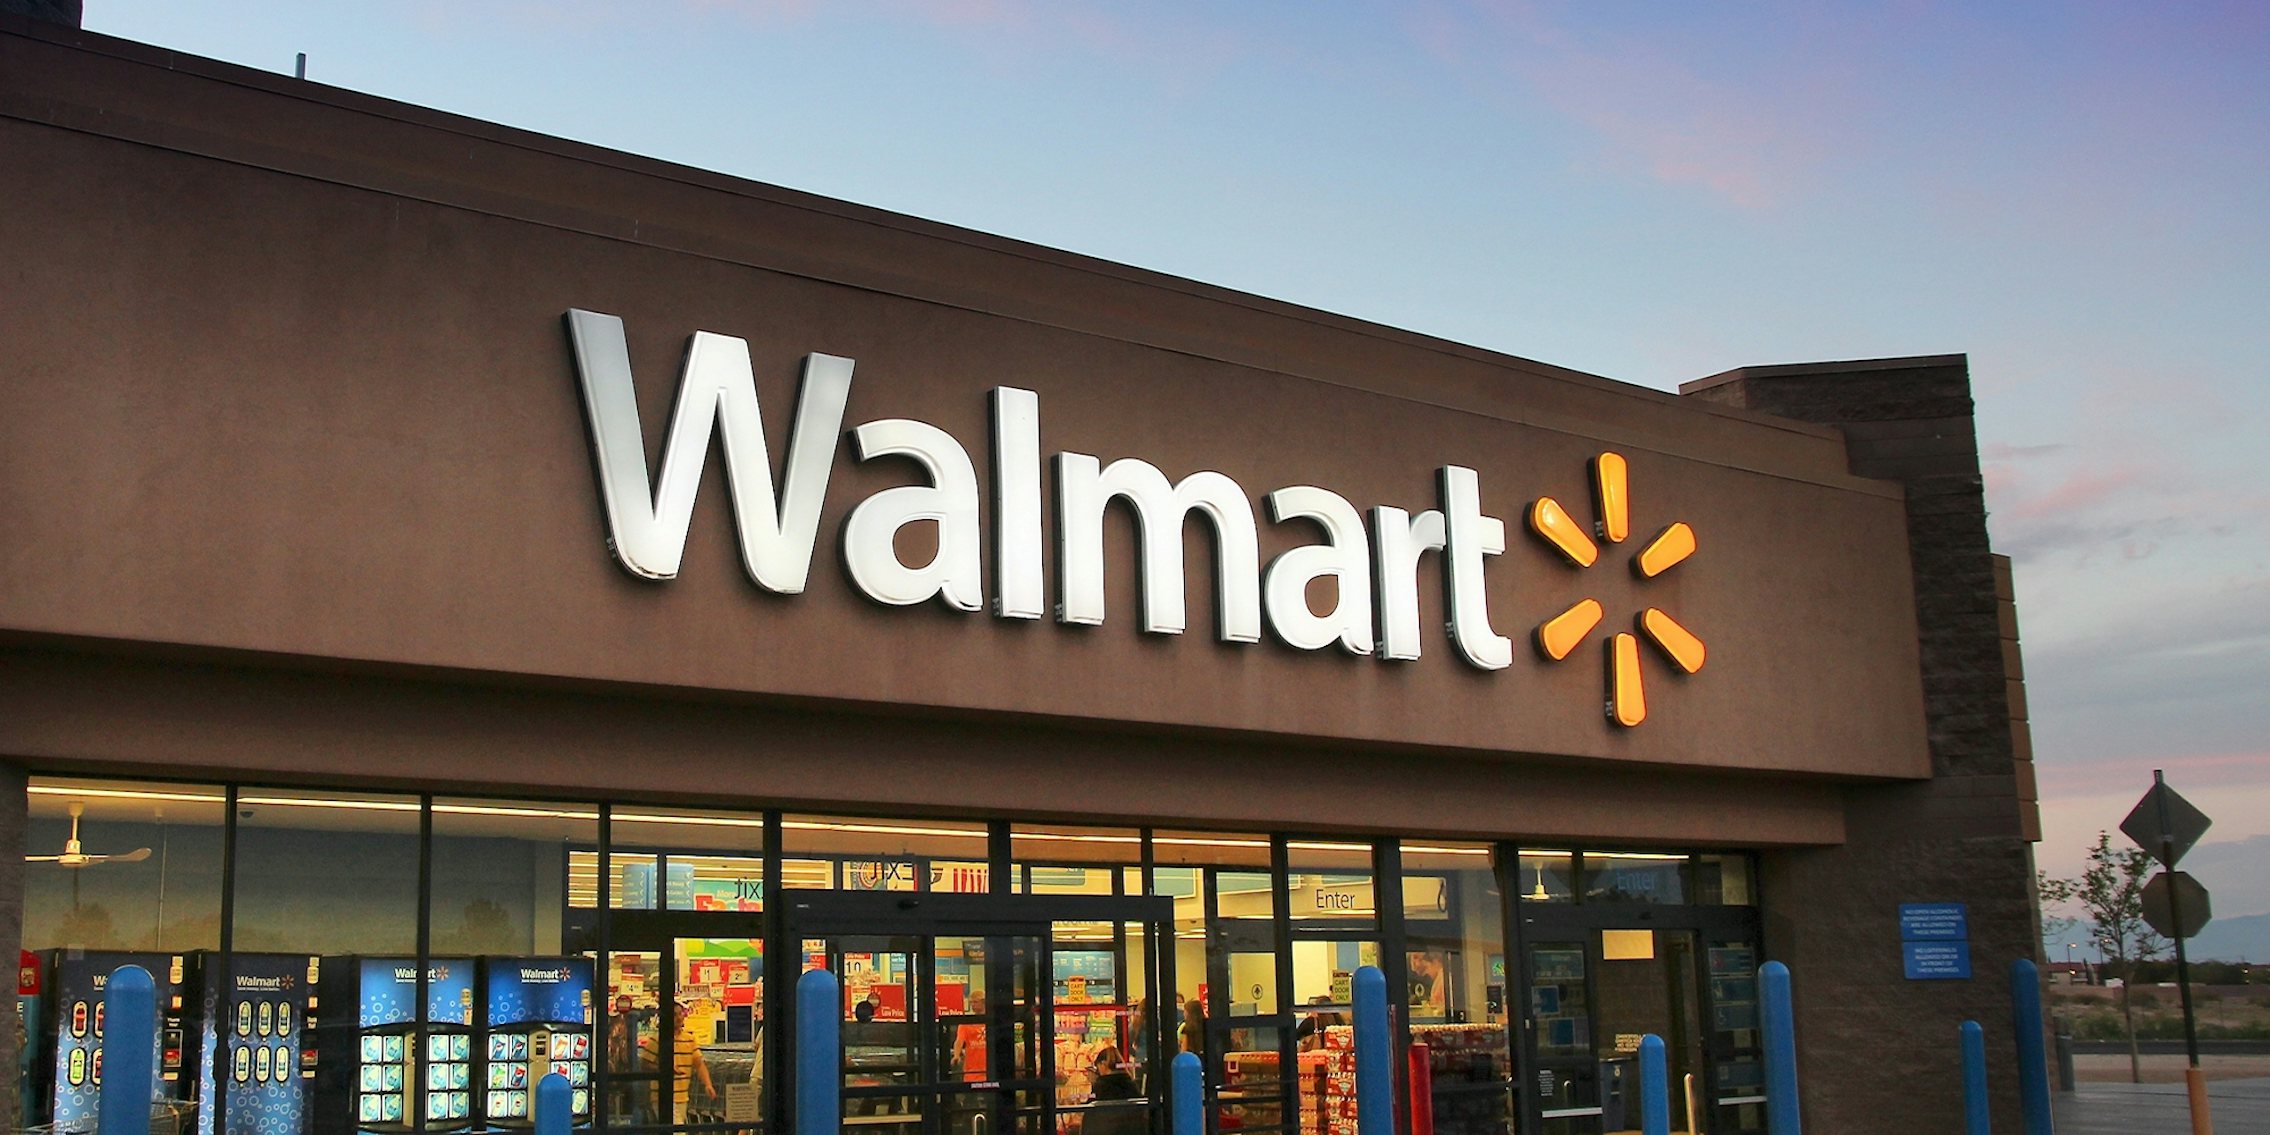 Walmart customer says man with clipboard followed her in-store.